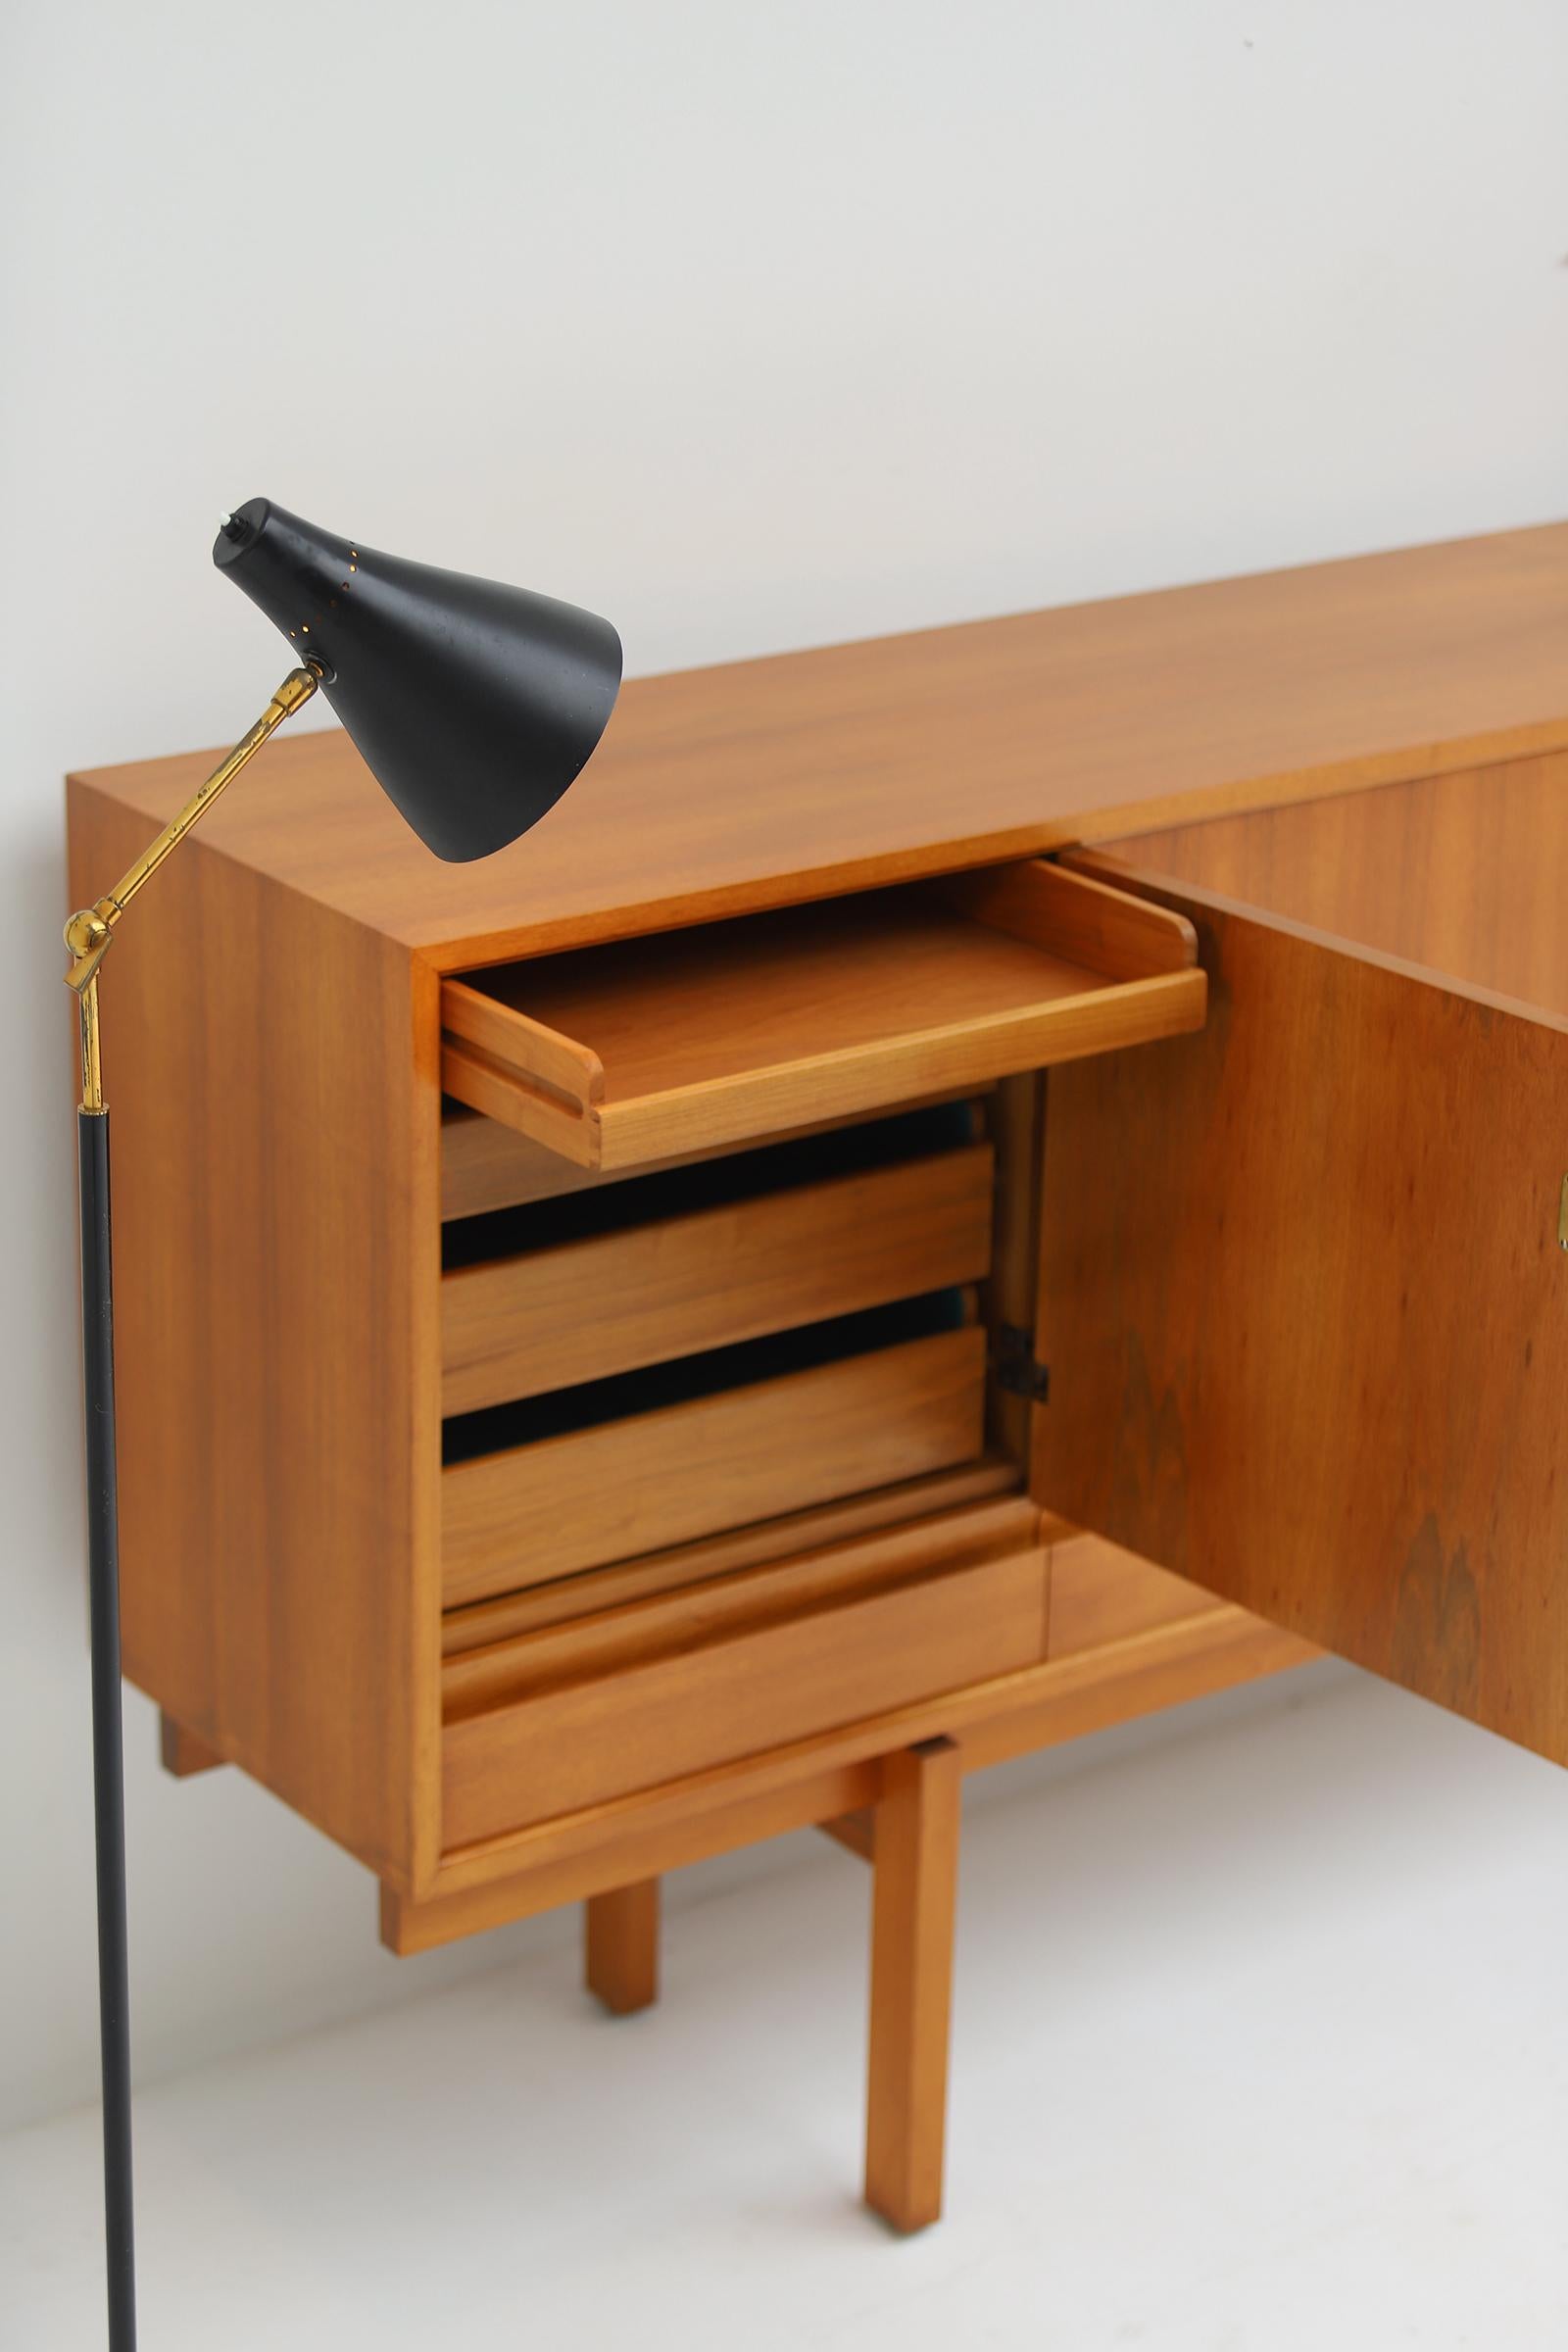 Mid-20th Century Mid-Century Modern Sideboard by Jos De Mey for Van Den Berghe Pauvers, 1960 For Sale